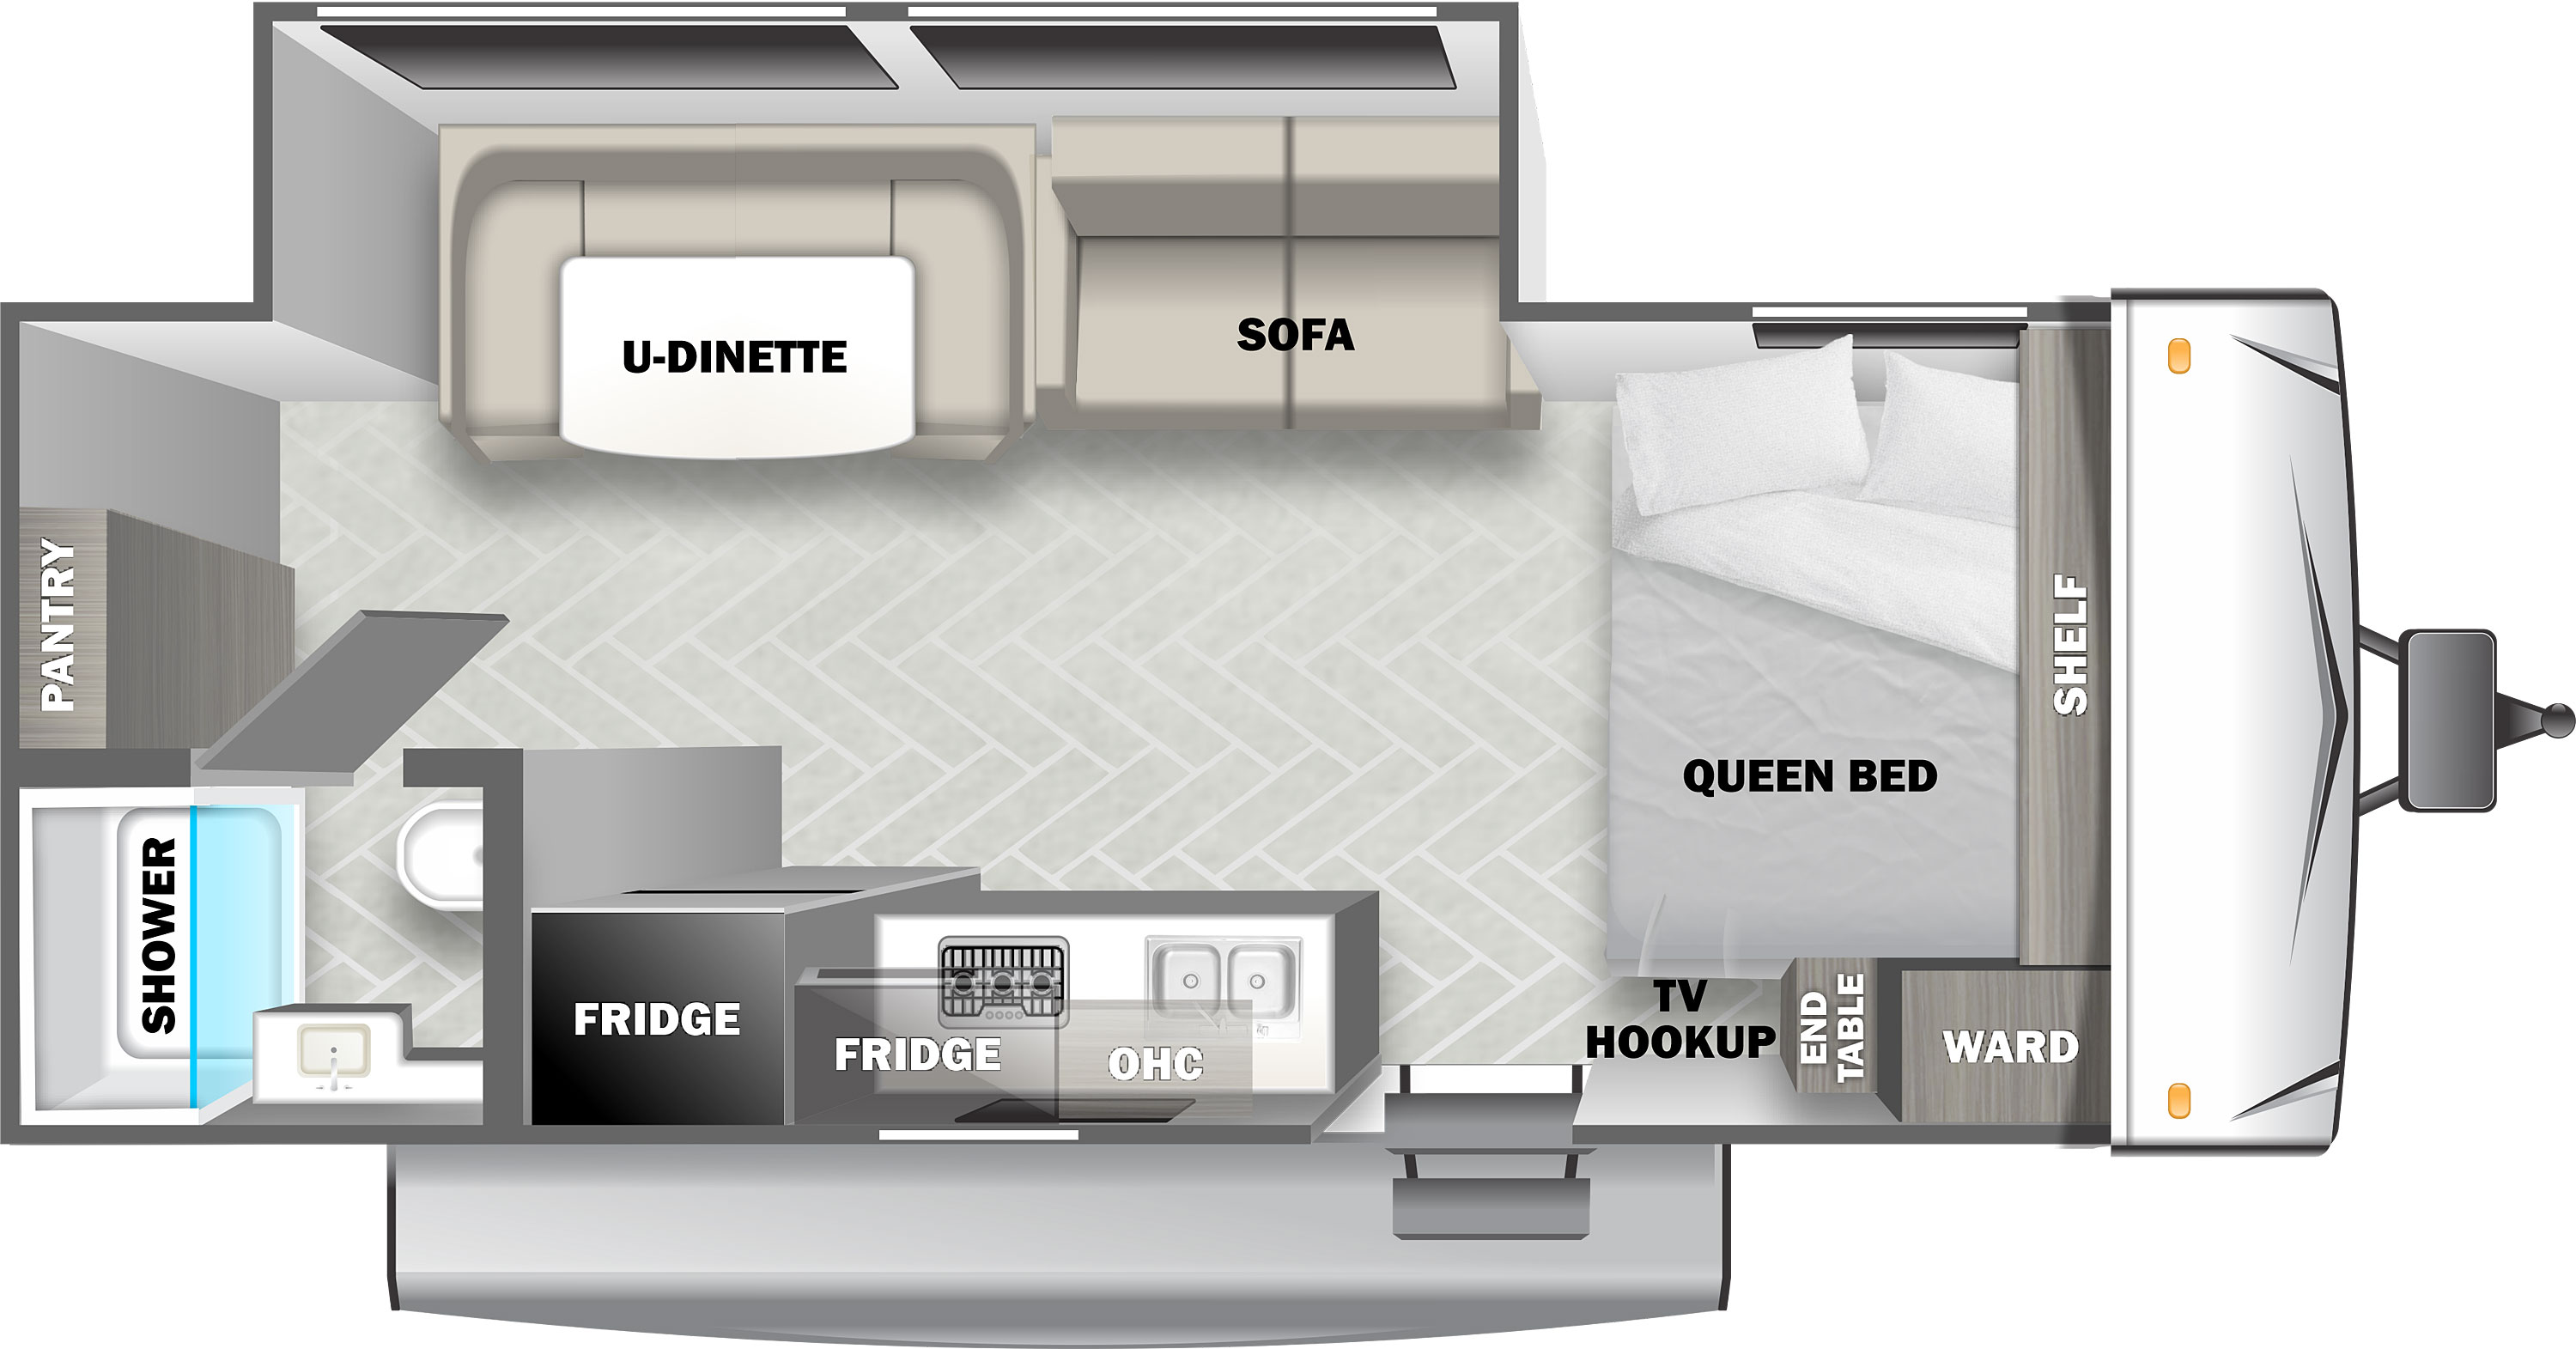 Evo Northwest 180SS floorplan. The 180SS has one slide out and one entry door.